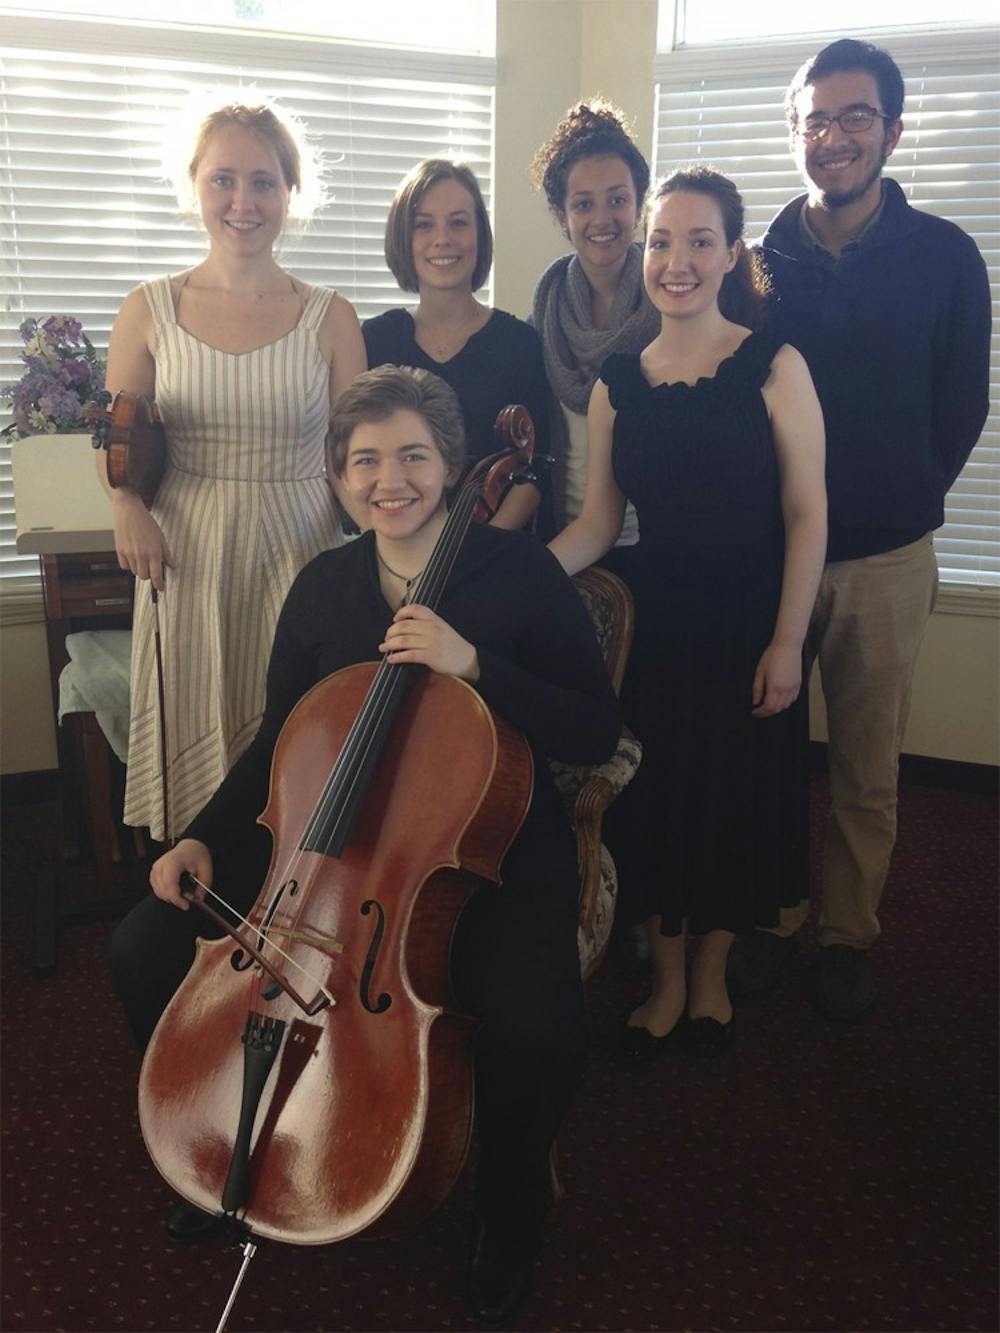 Classical Connections is a university organization that pairs student musicians with homeless shelters, retirement homes, hospitals and other areas in the Bloomington community.